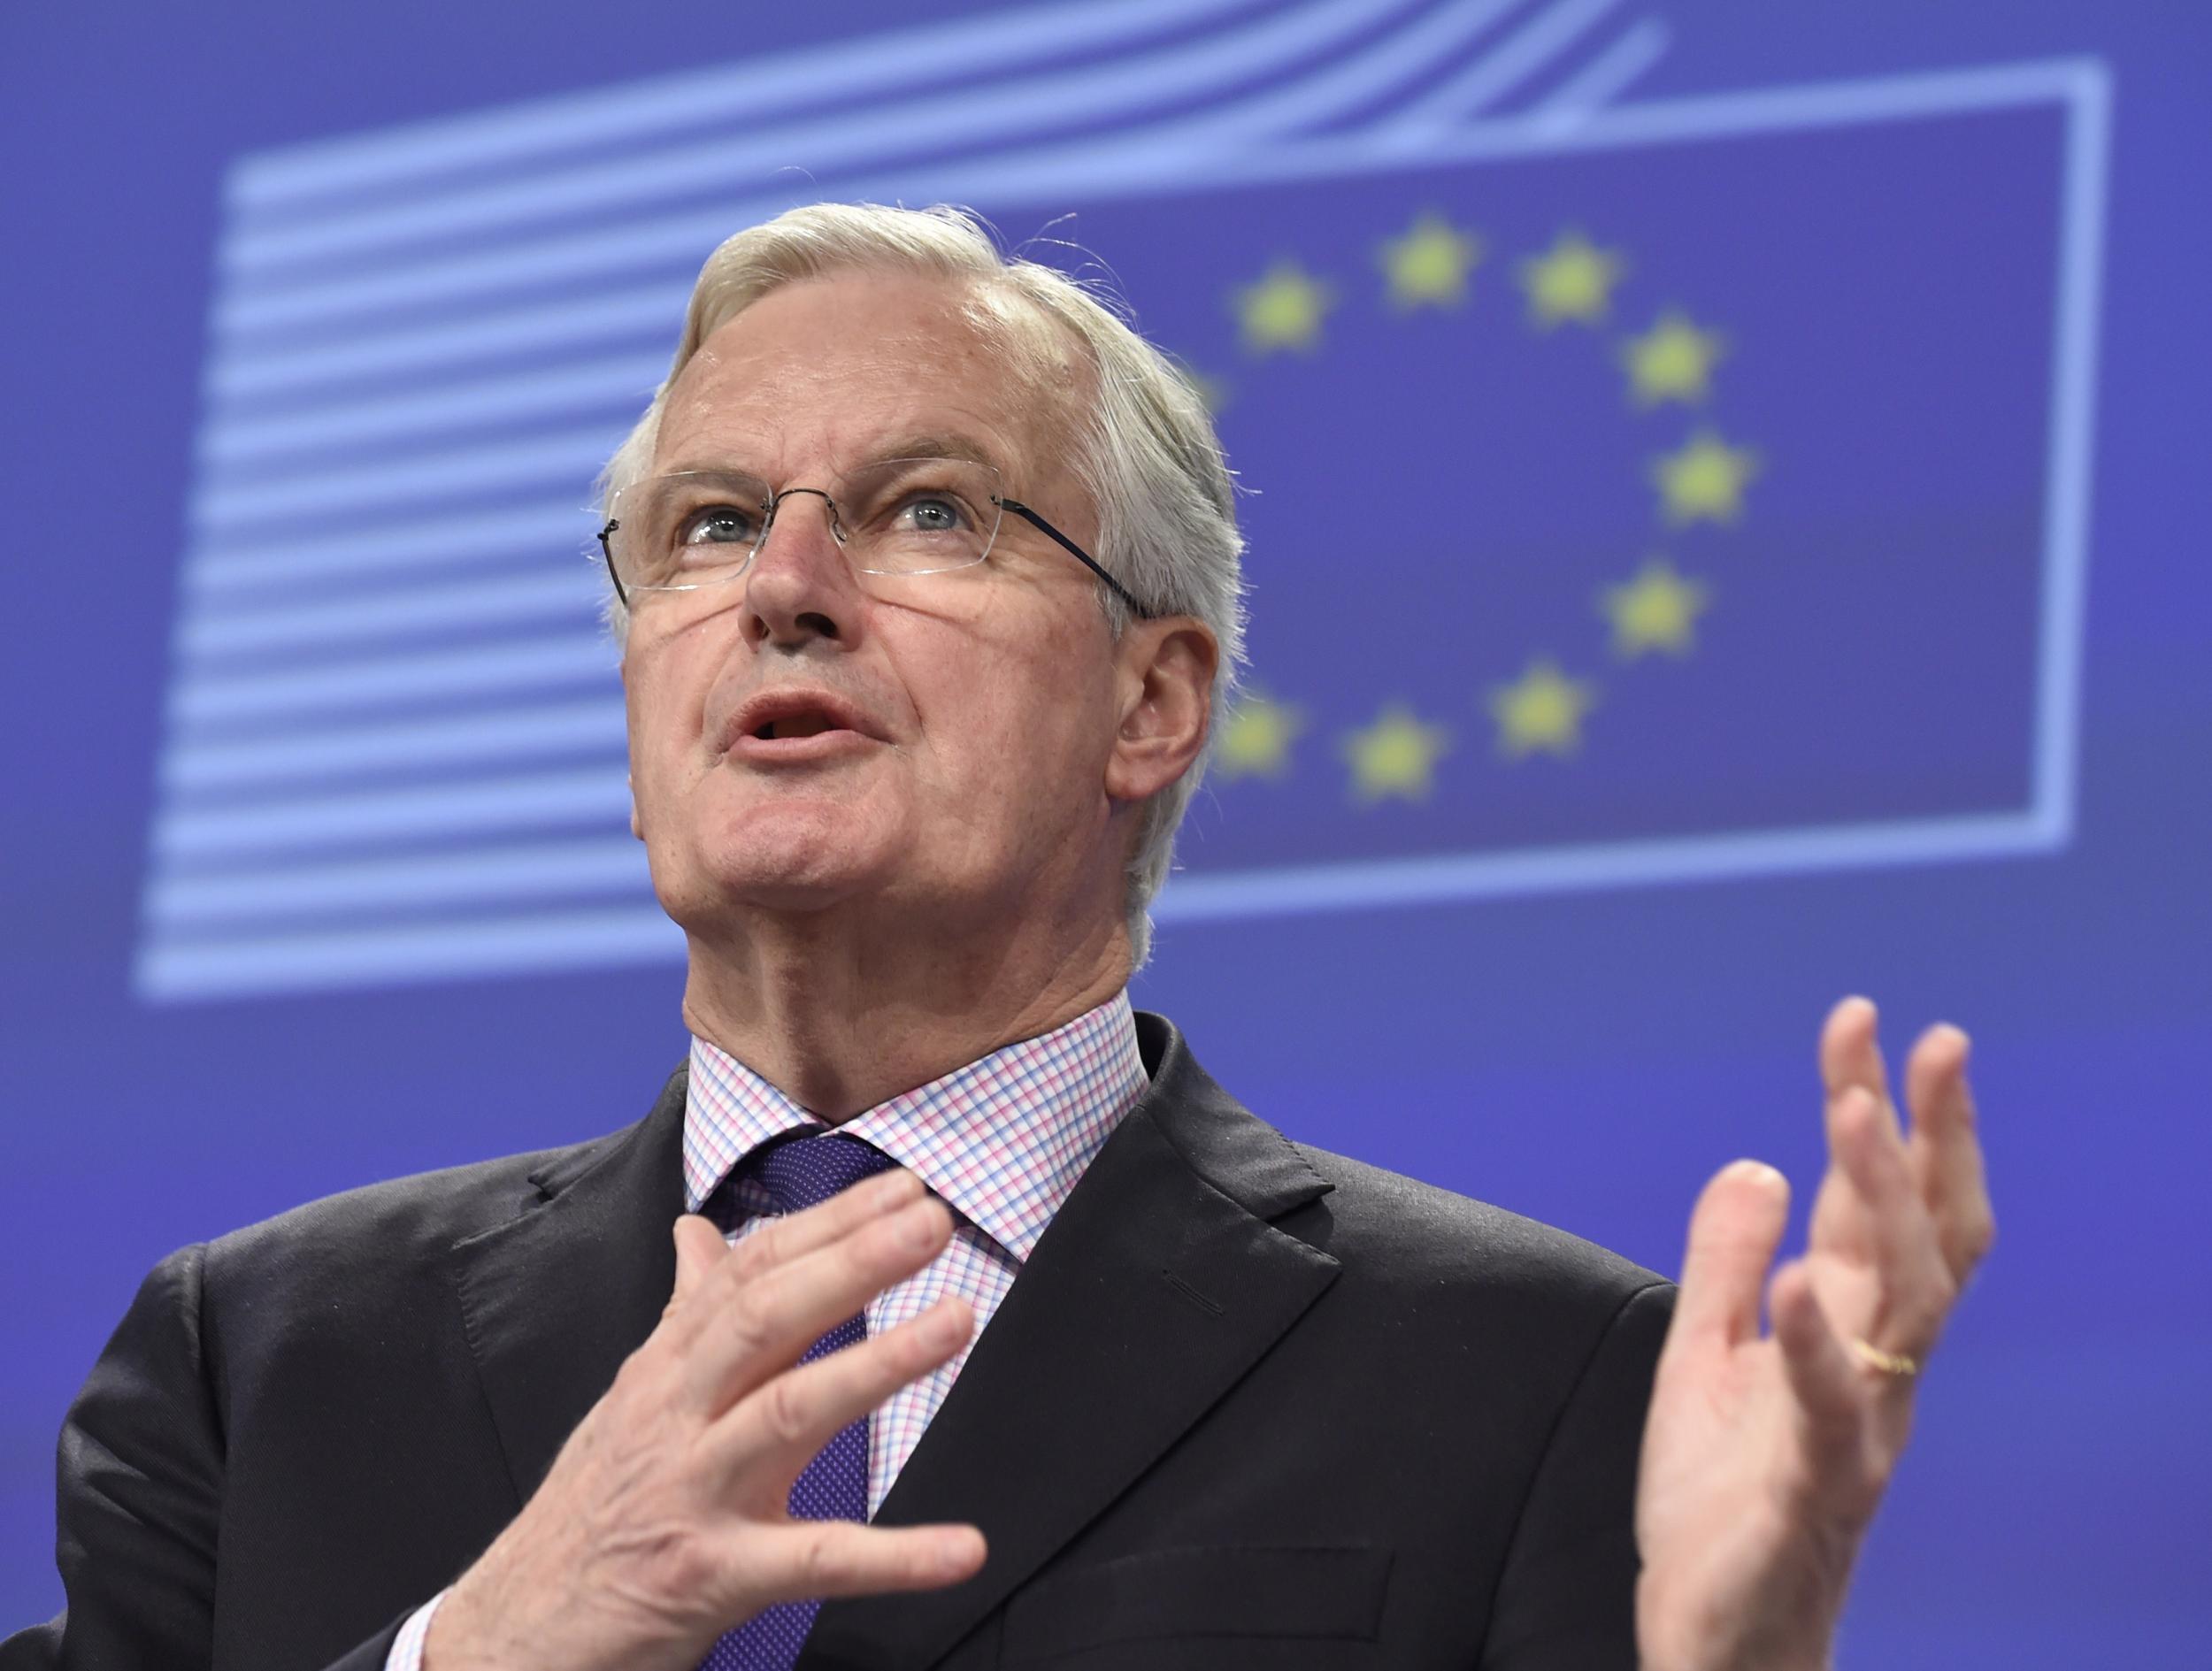 Michel Barnier, a negotiator over Brexit on behalf of the EU, has already said he will not engage with the UK until Article 50 is triggered